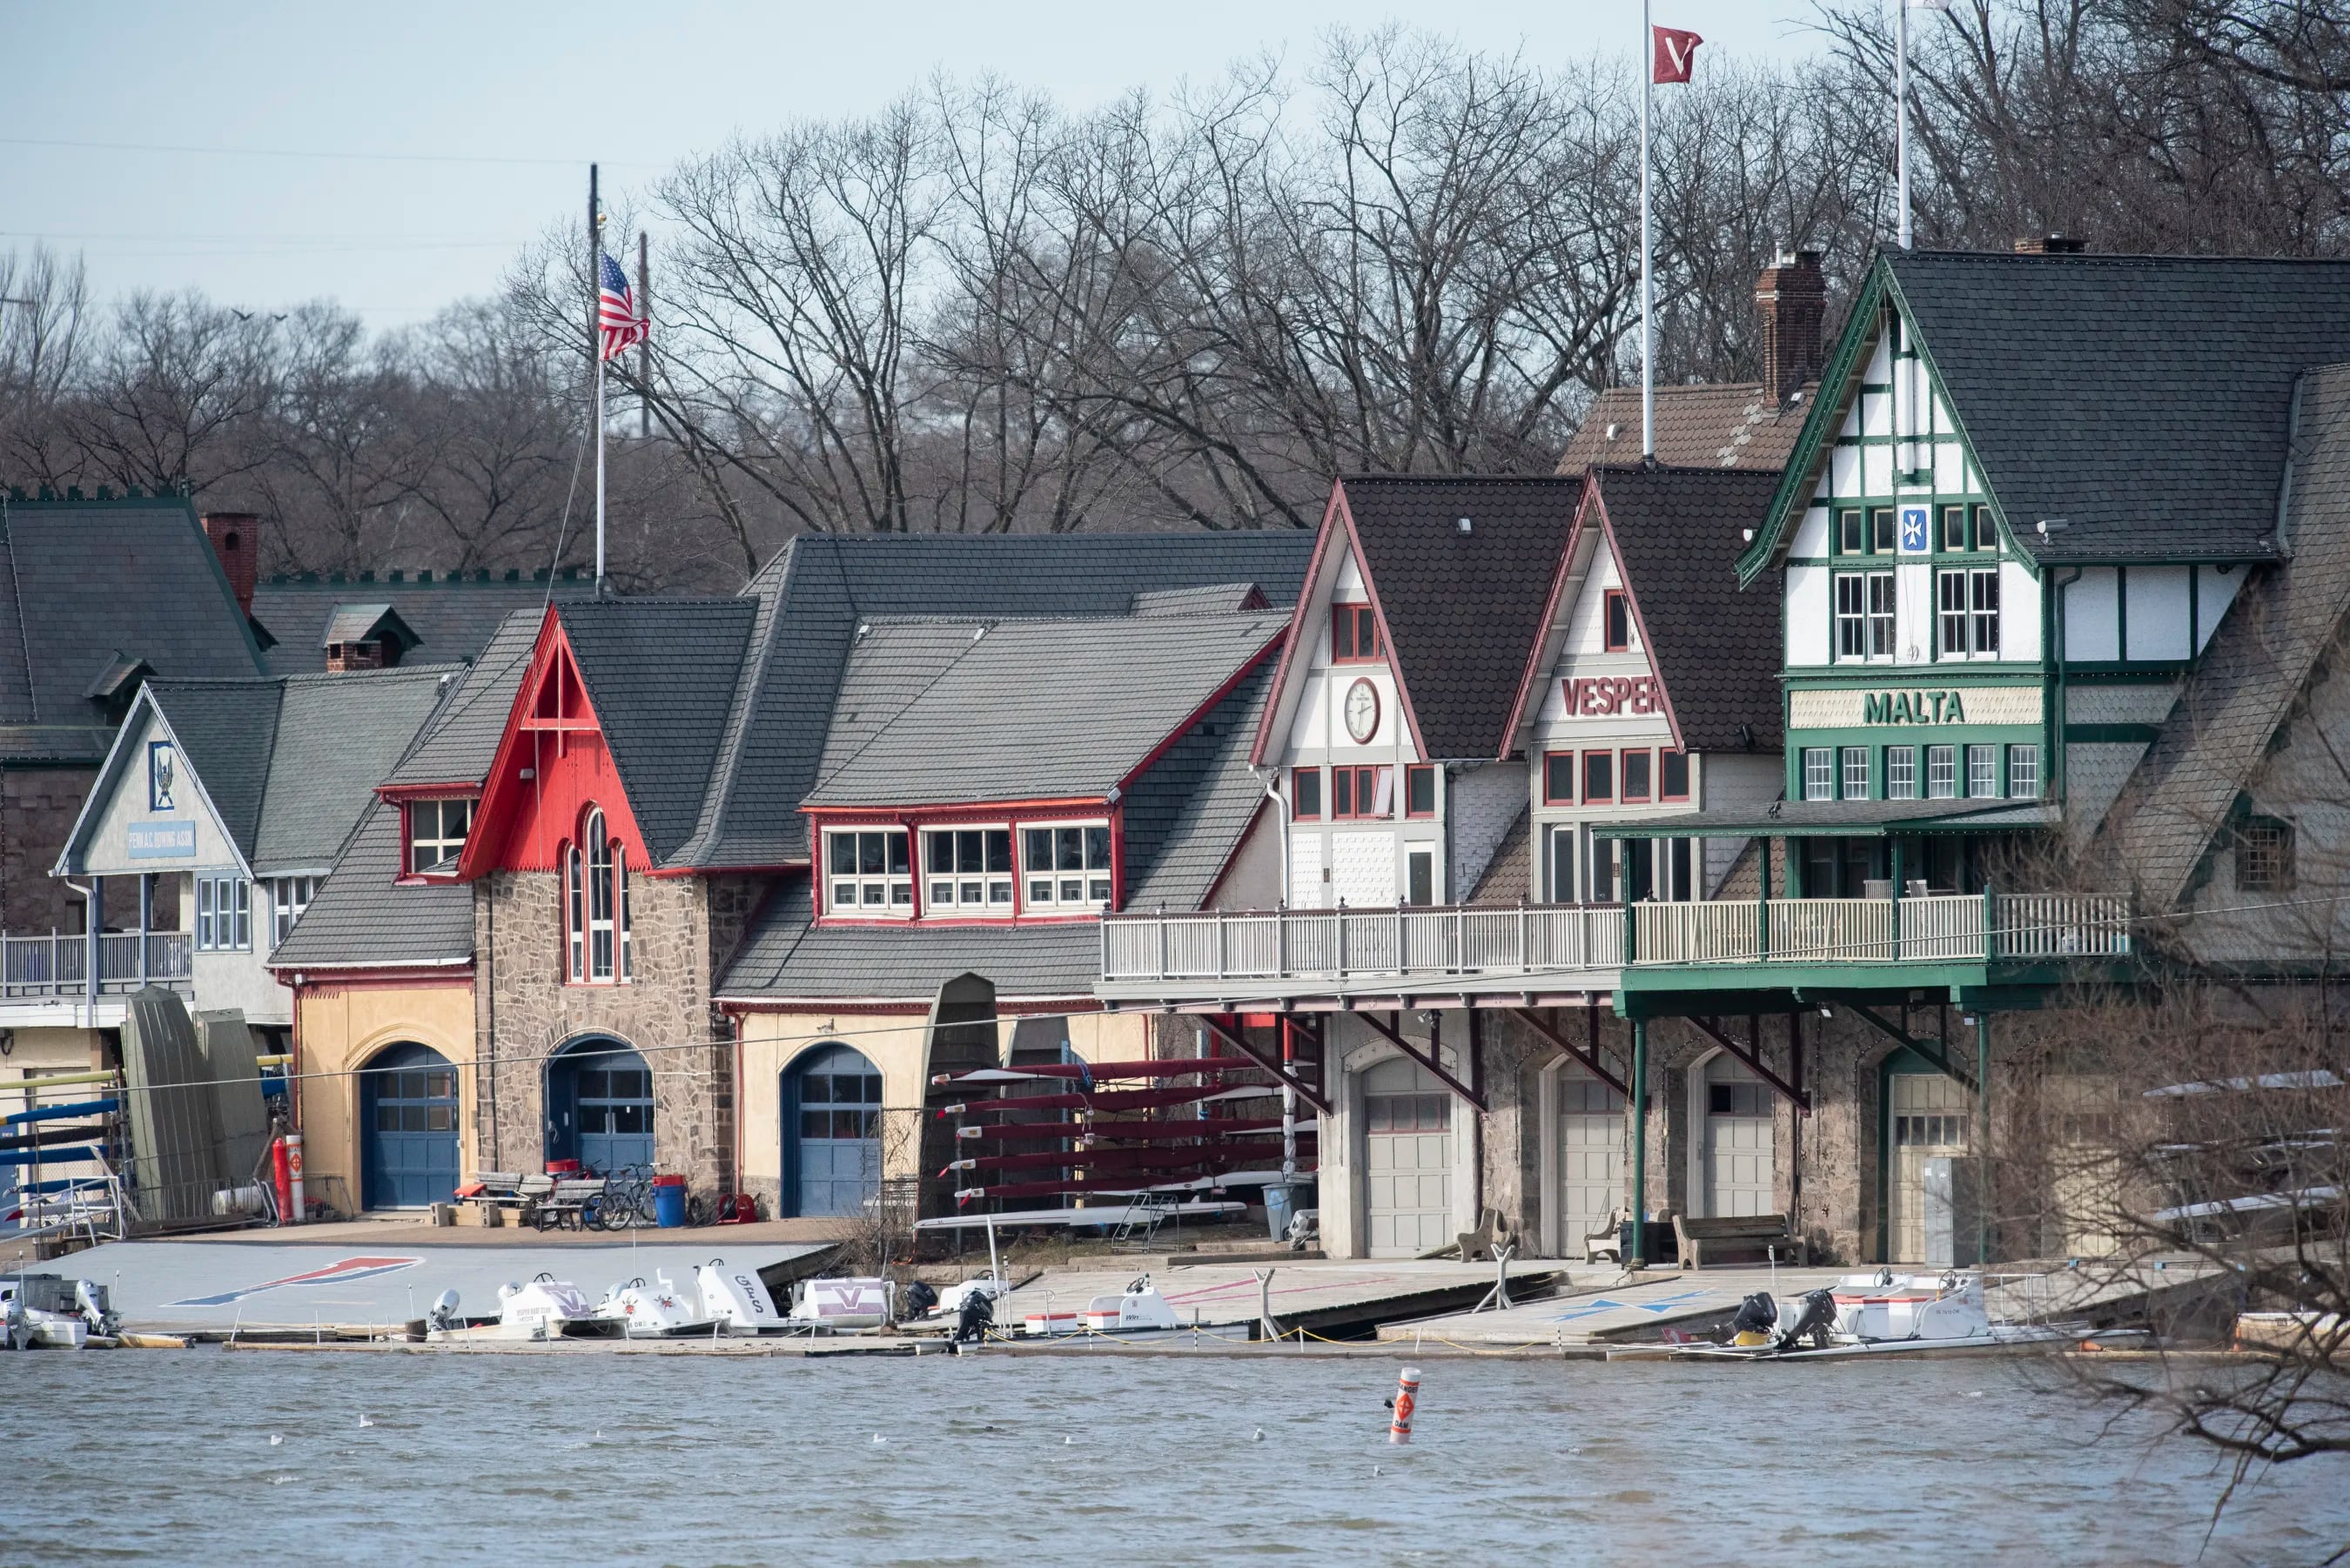 Philadelphia 76ers Pay Tribute To Boathouse Row With New City